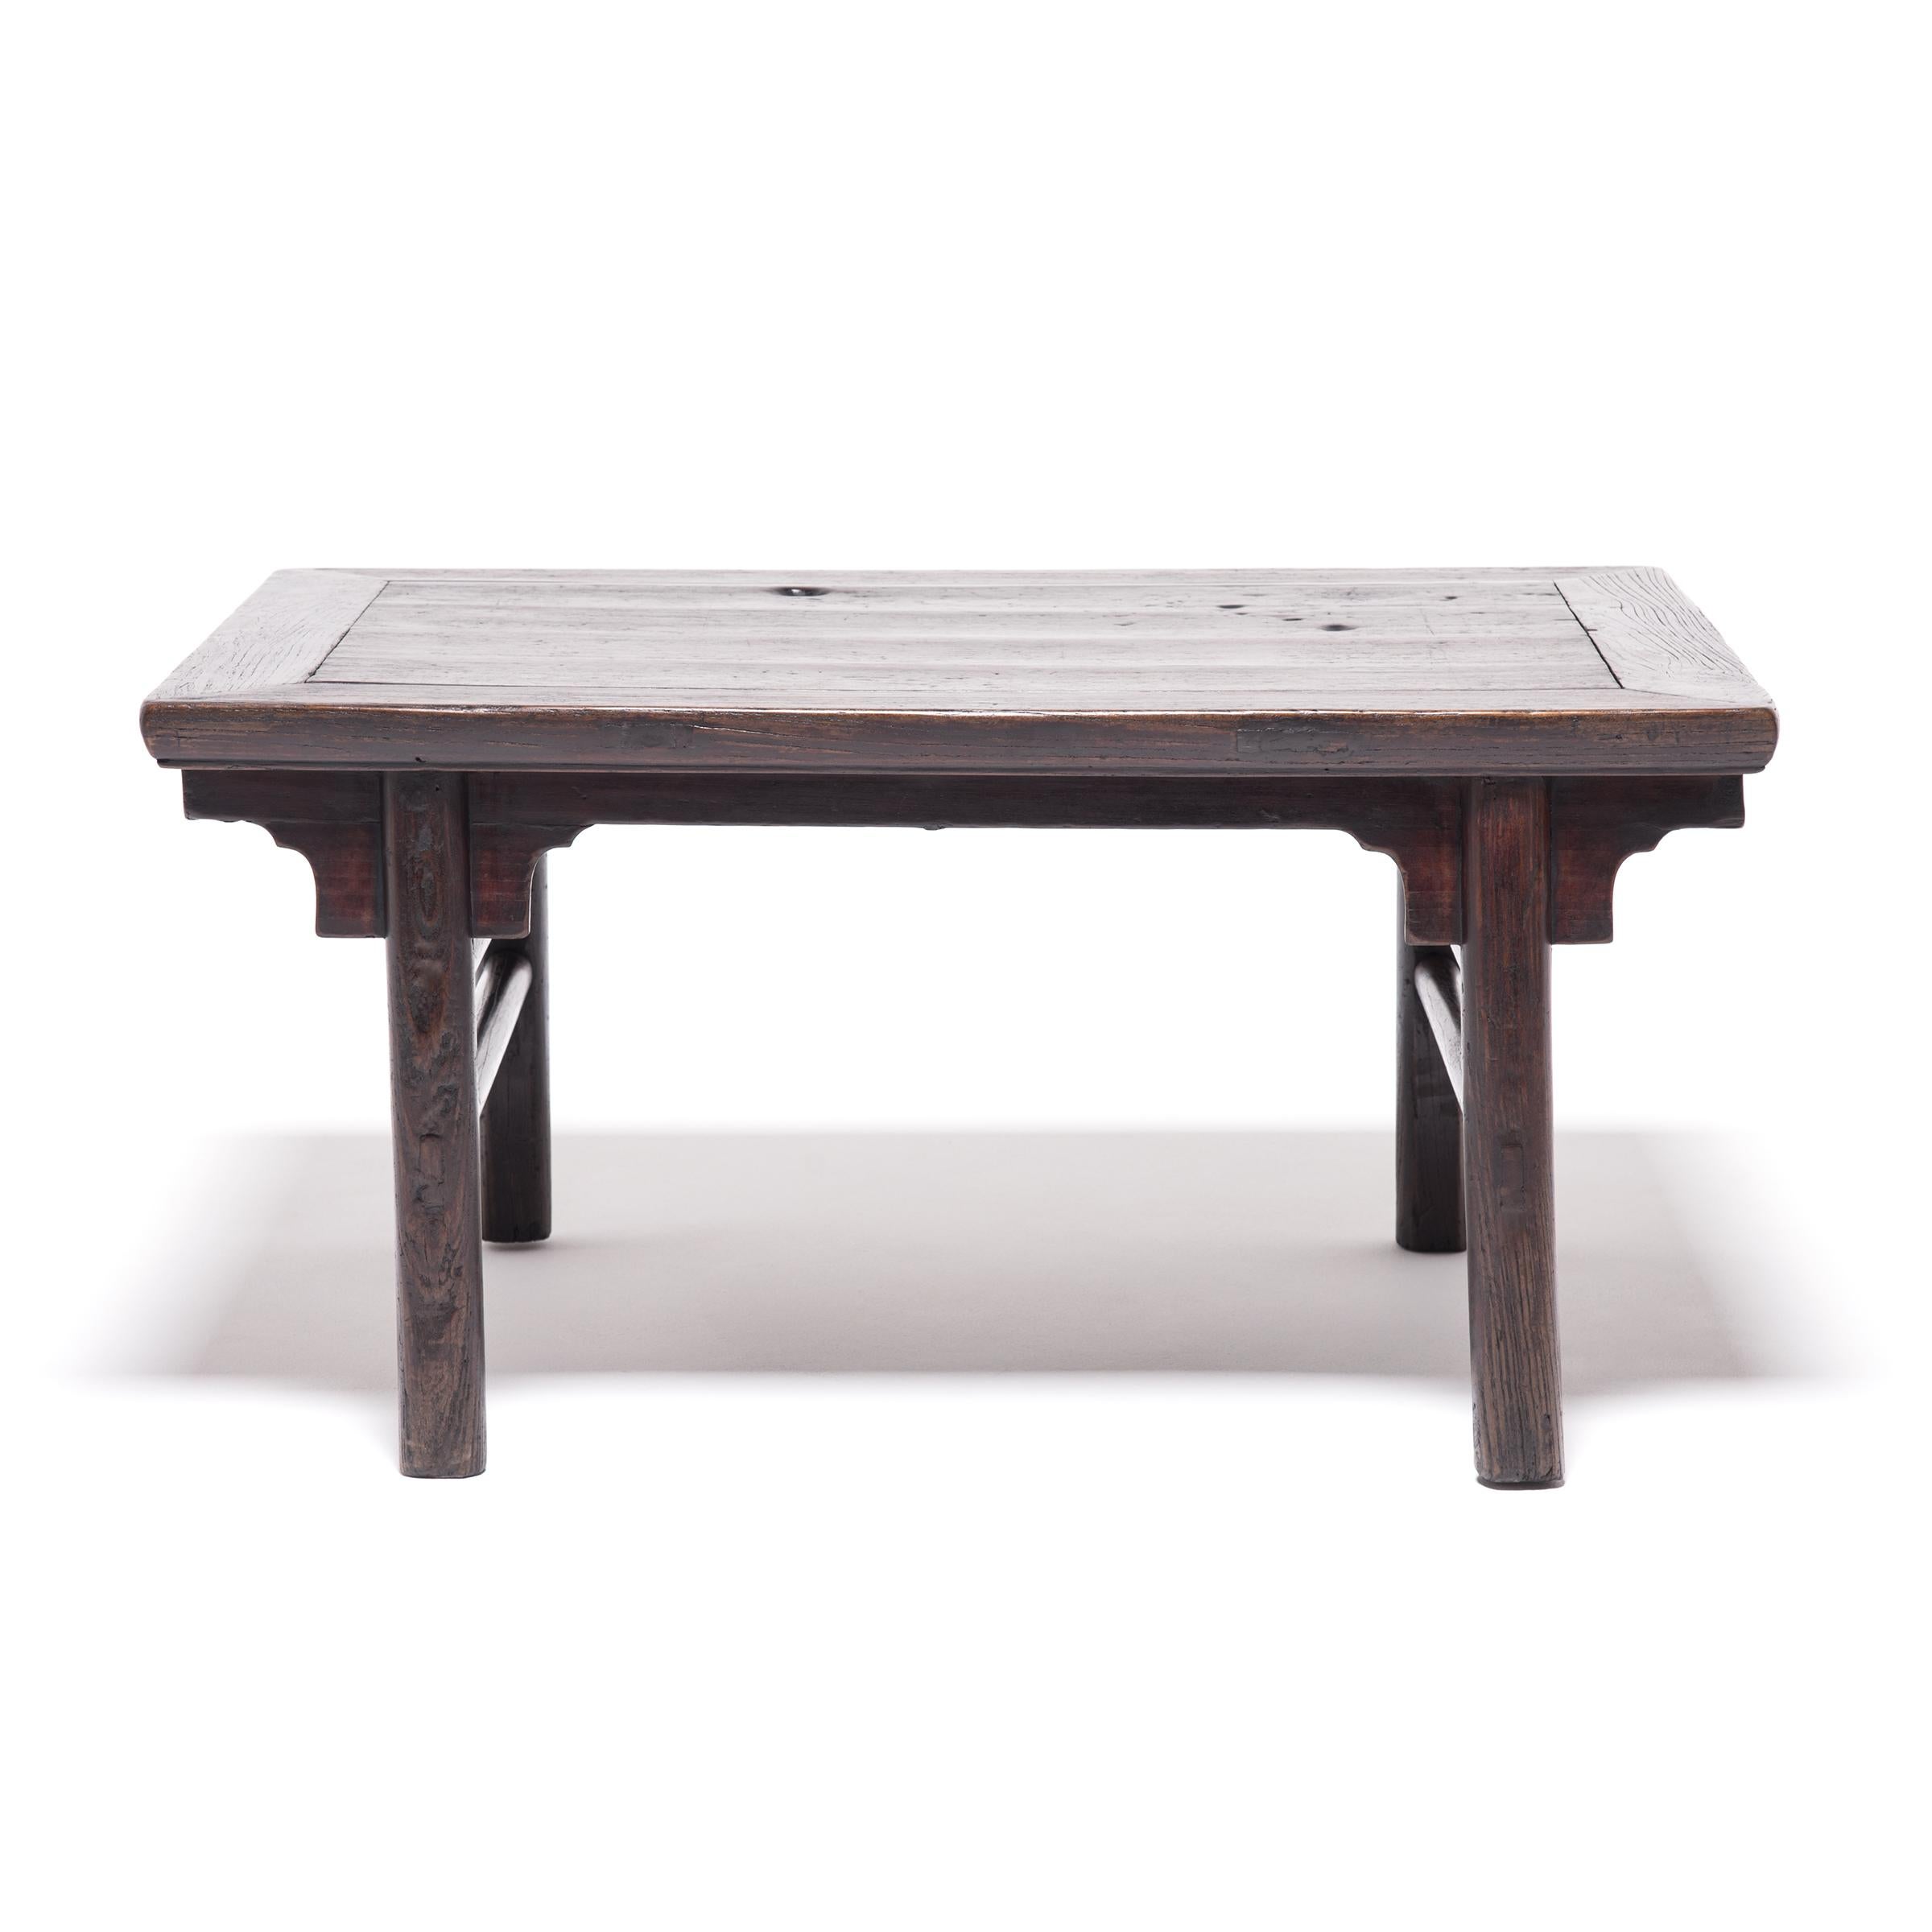 Pair of Chinese Low Inset Leg Tables, c. 1850 For Sale 2